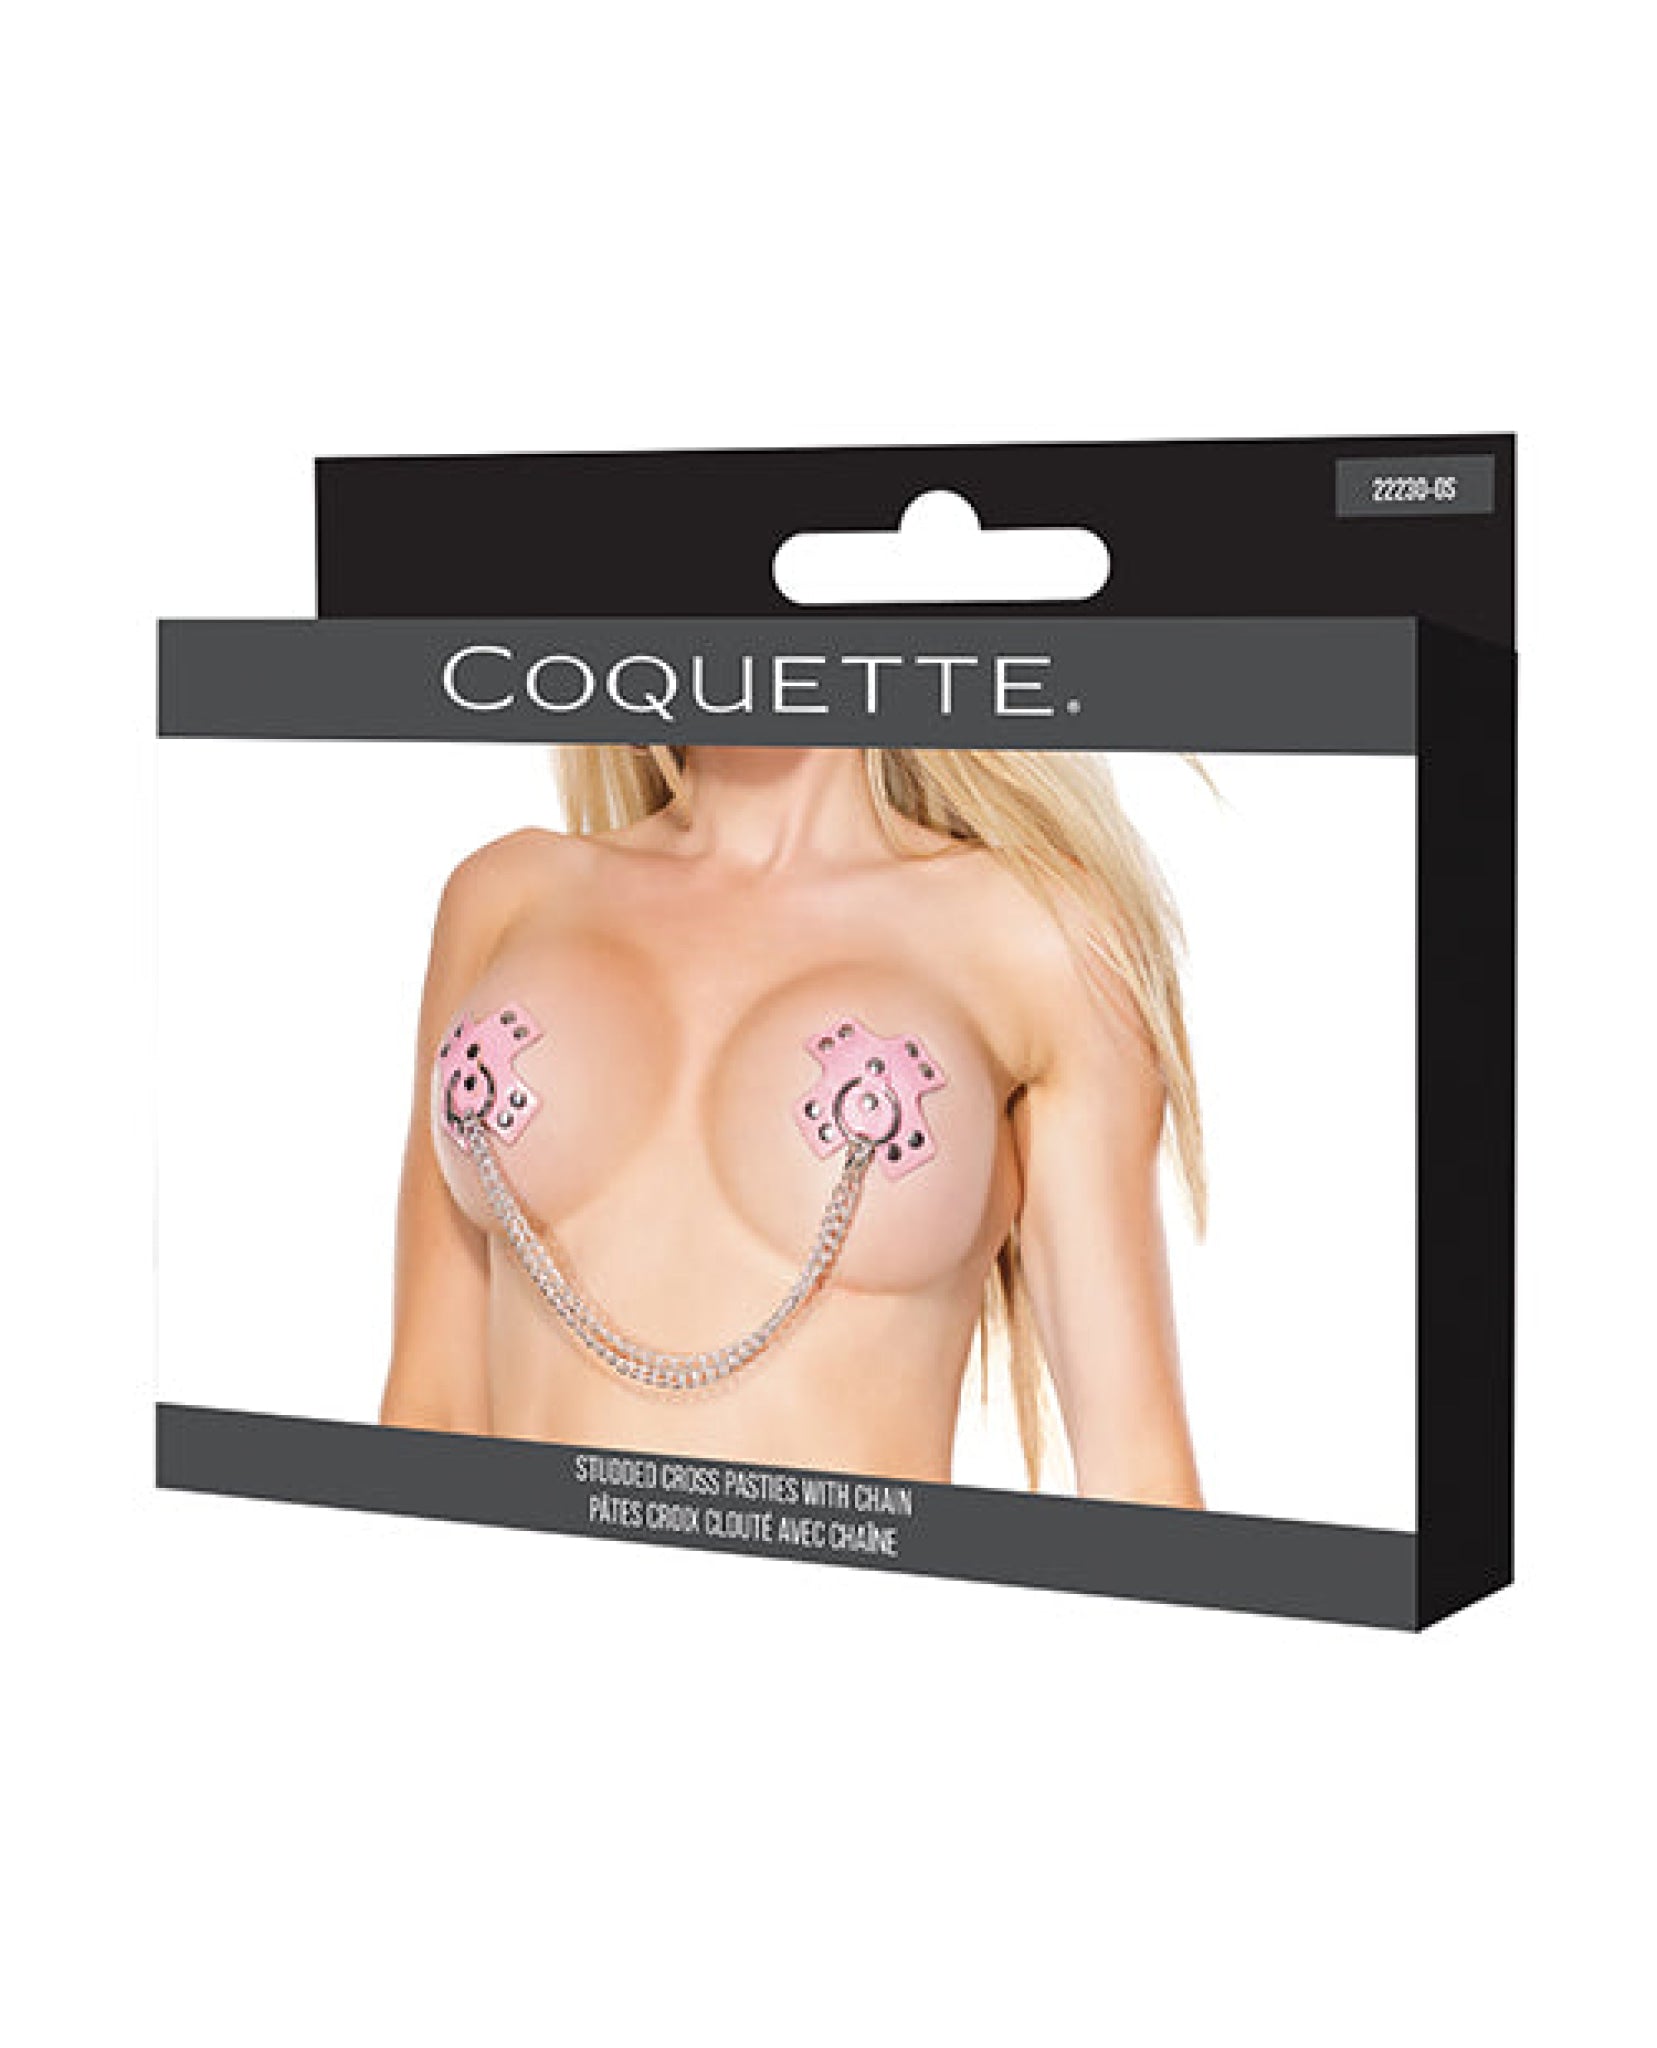 Darque Studded Cross Reusable Pasties W/chain - Pink O/s Coquette